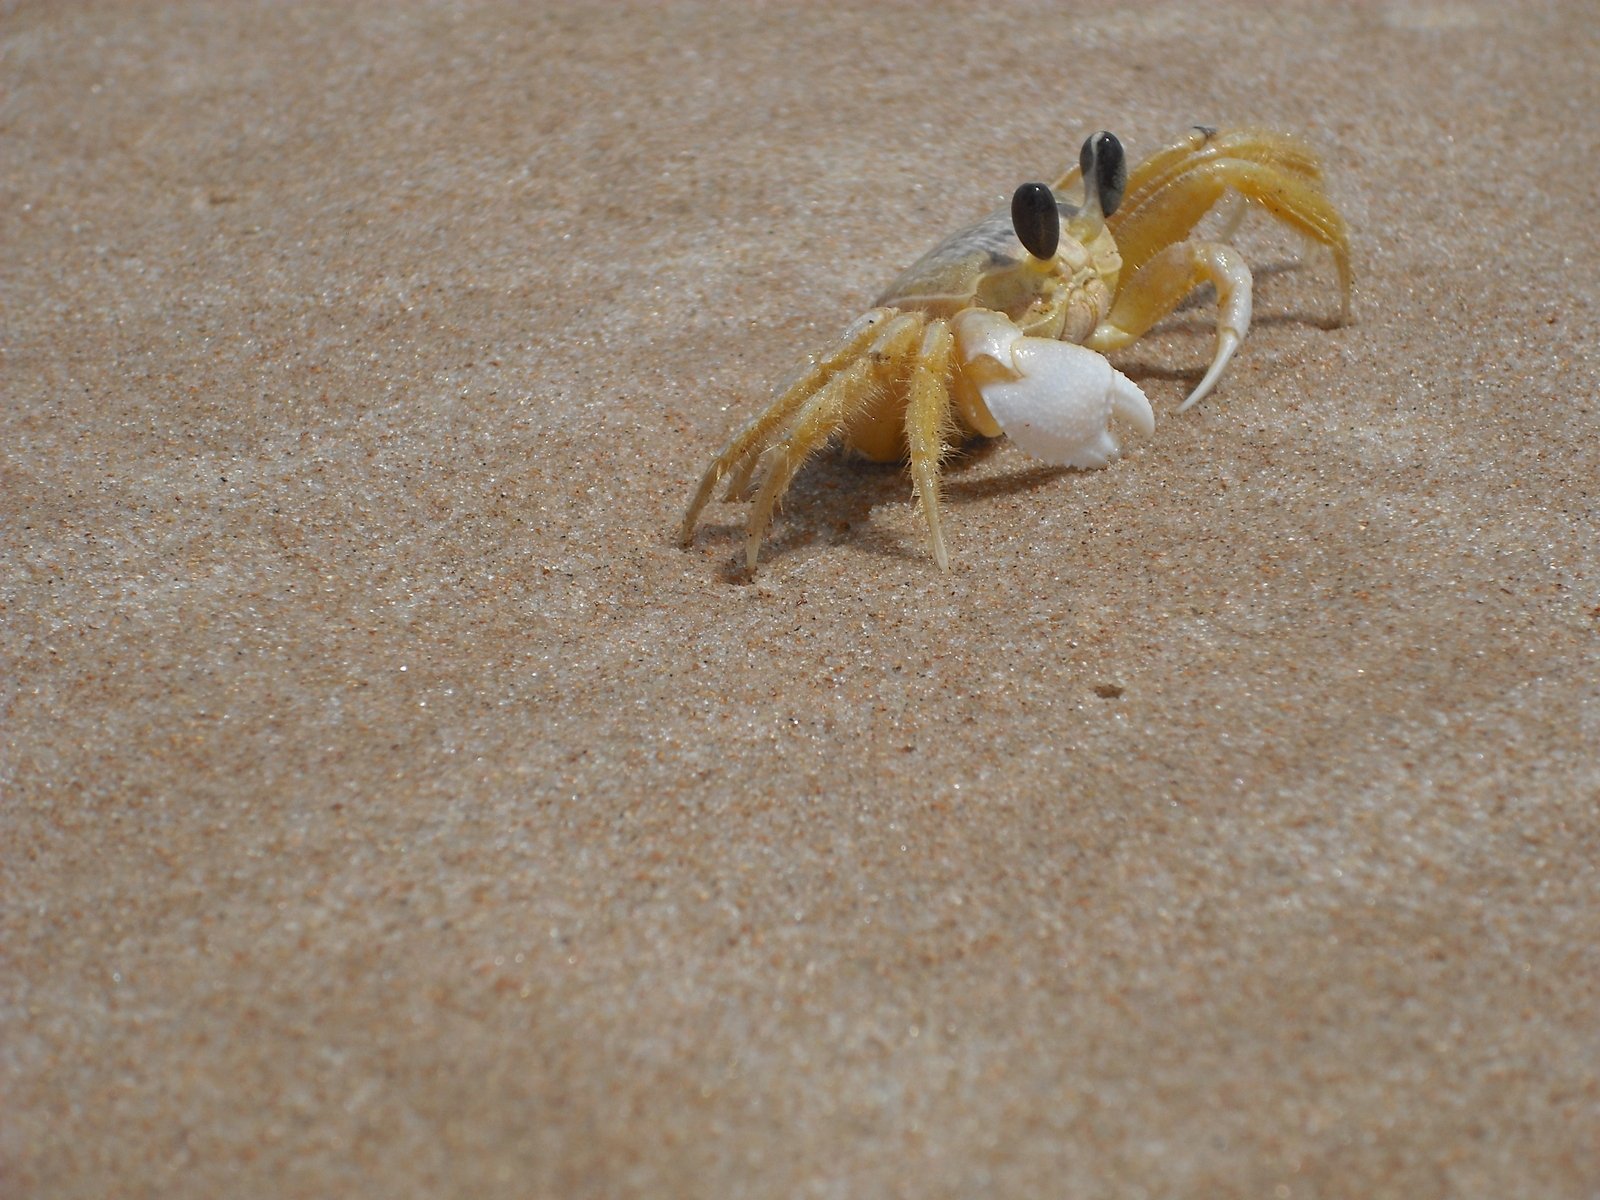 a small crab on the sand eating a meal